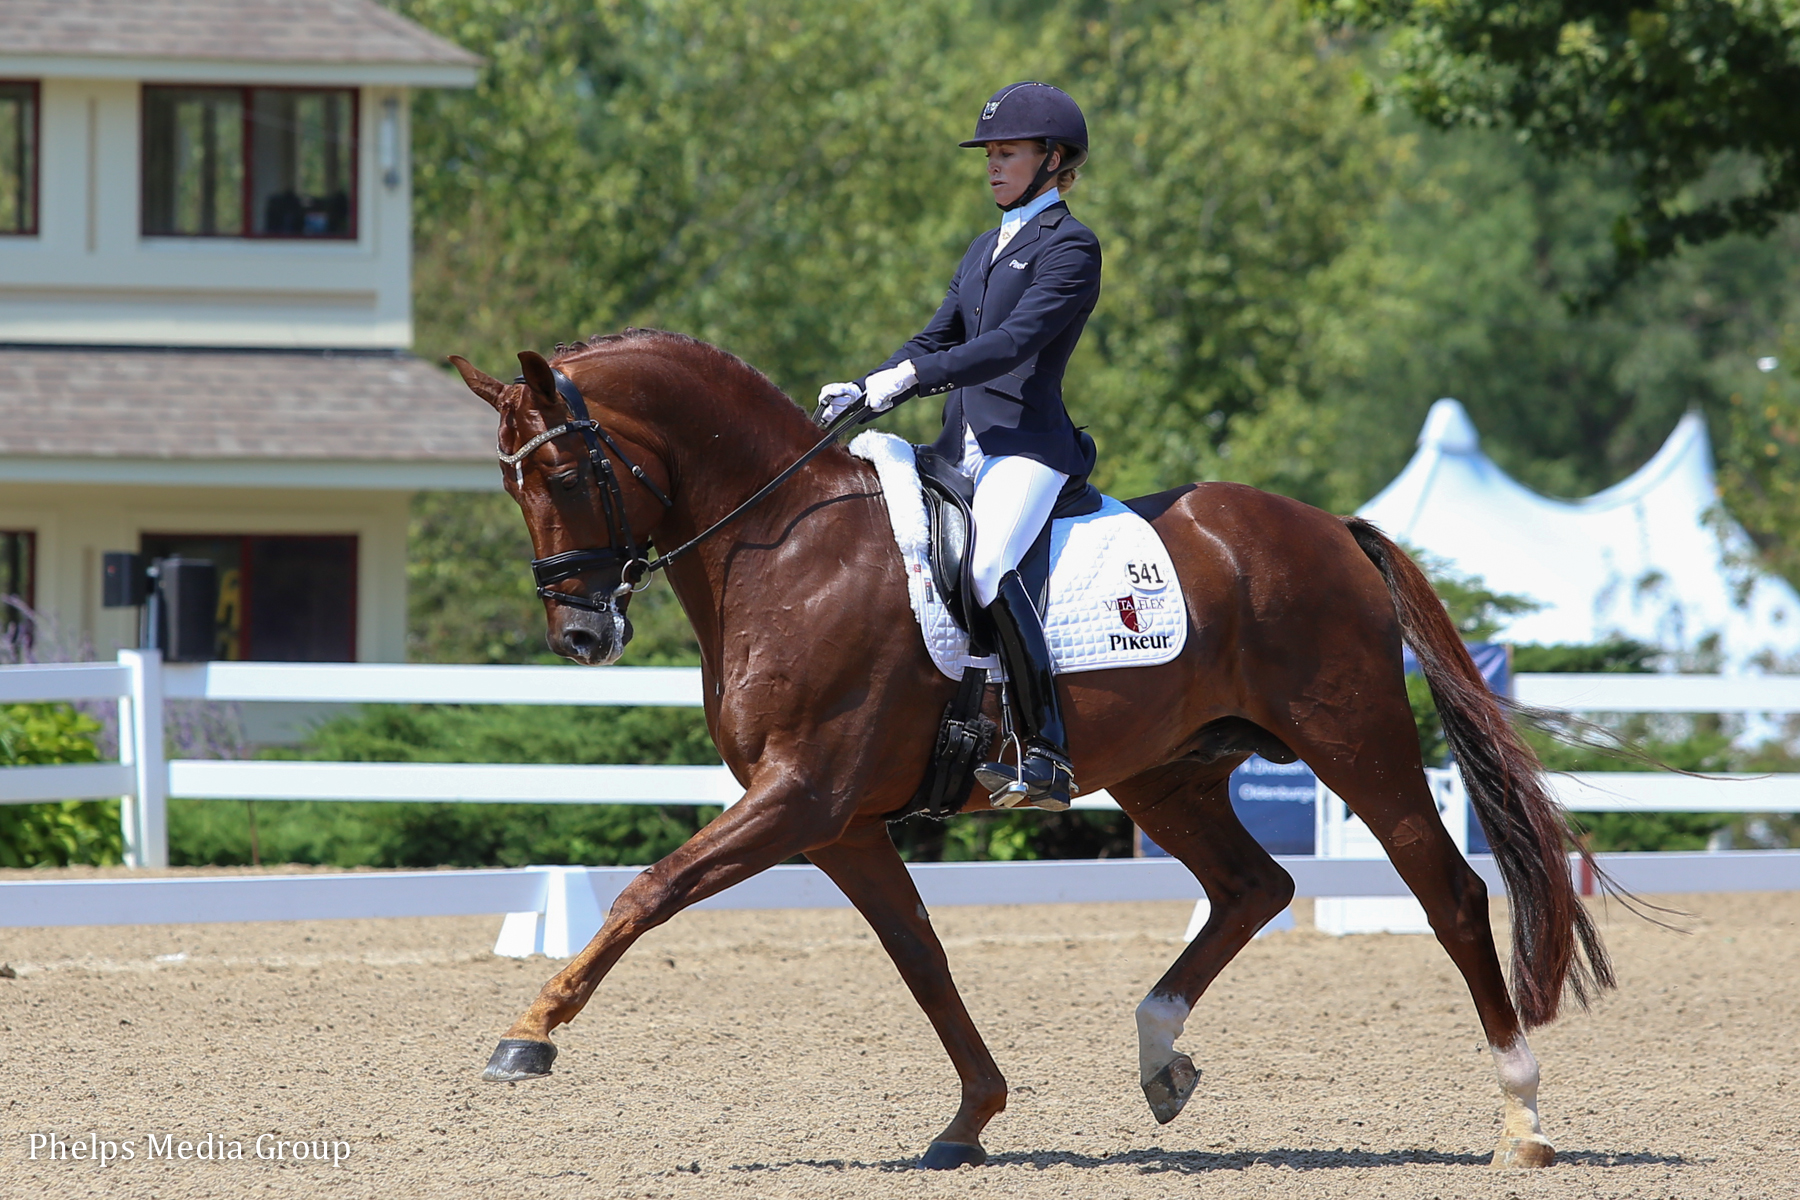 Lisa Wilcox and Gallant Reflection HU during the 2015 Markel/USEF Young and Developing Horse Dressage National Championships. Photo: Mary Adelaide Brakenridge/Phelps Media Group.